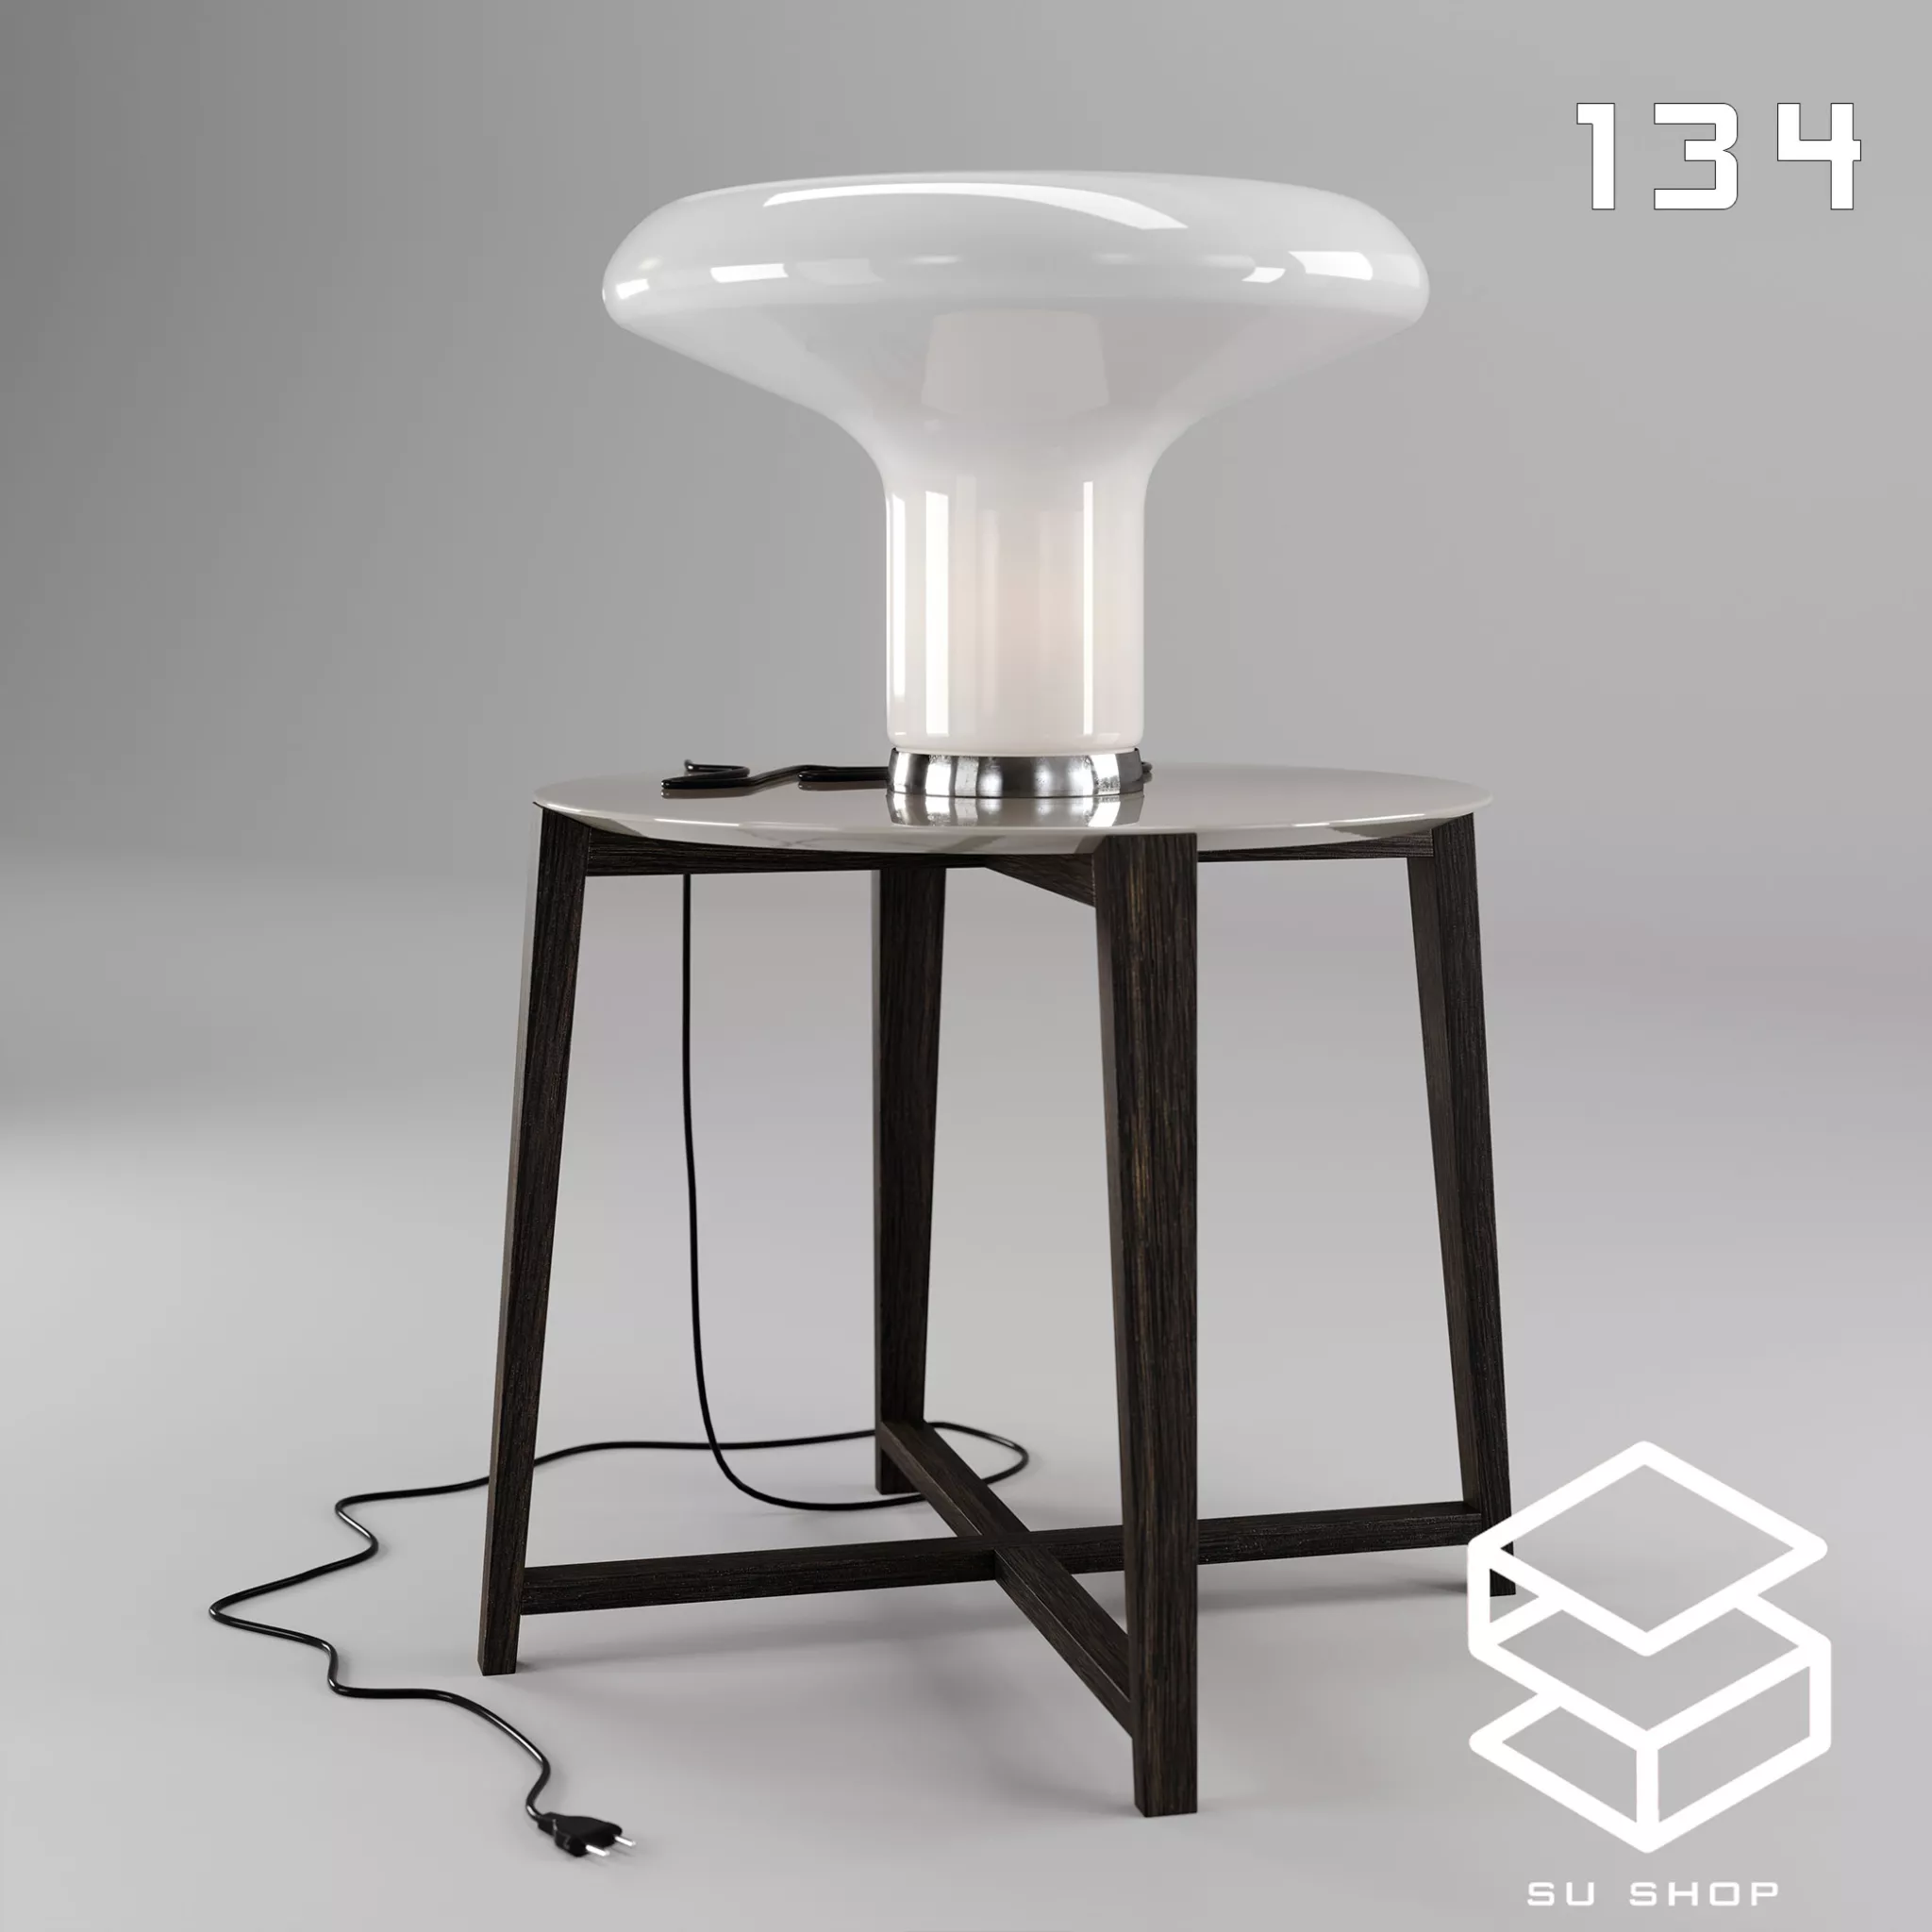 MODERN TABLE LAMP - SKETCHUP 3D MODEL - VRAY OR ENSCAPE - ID14702